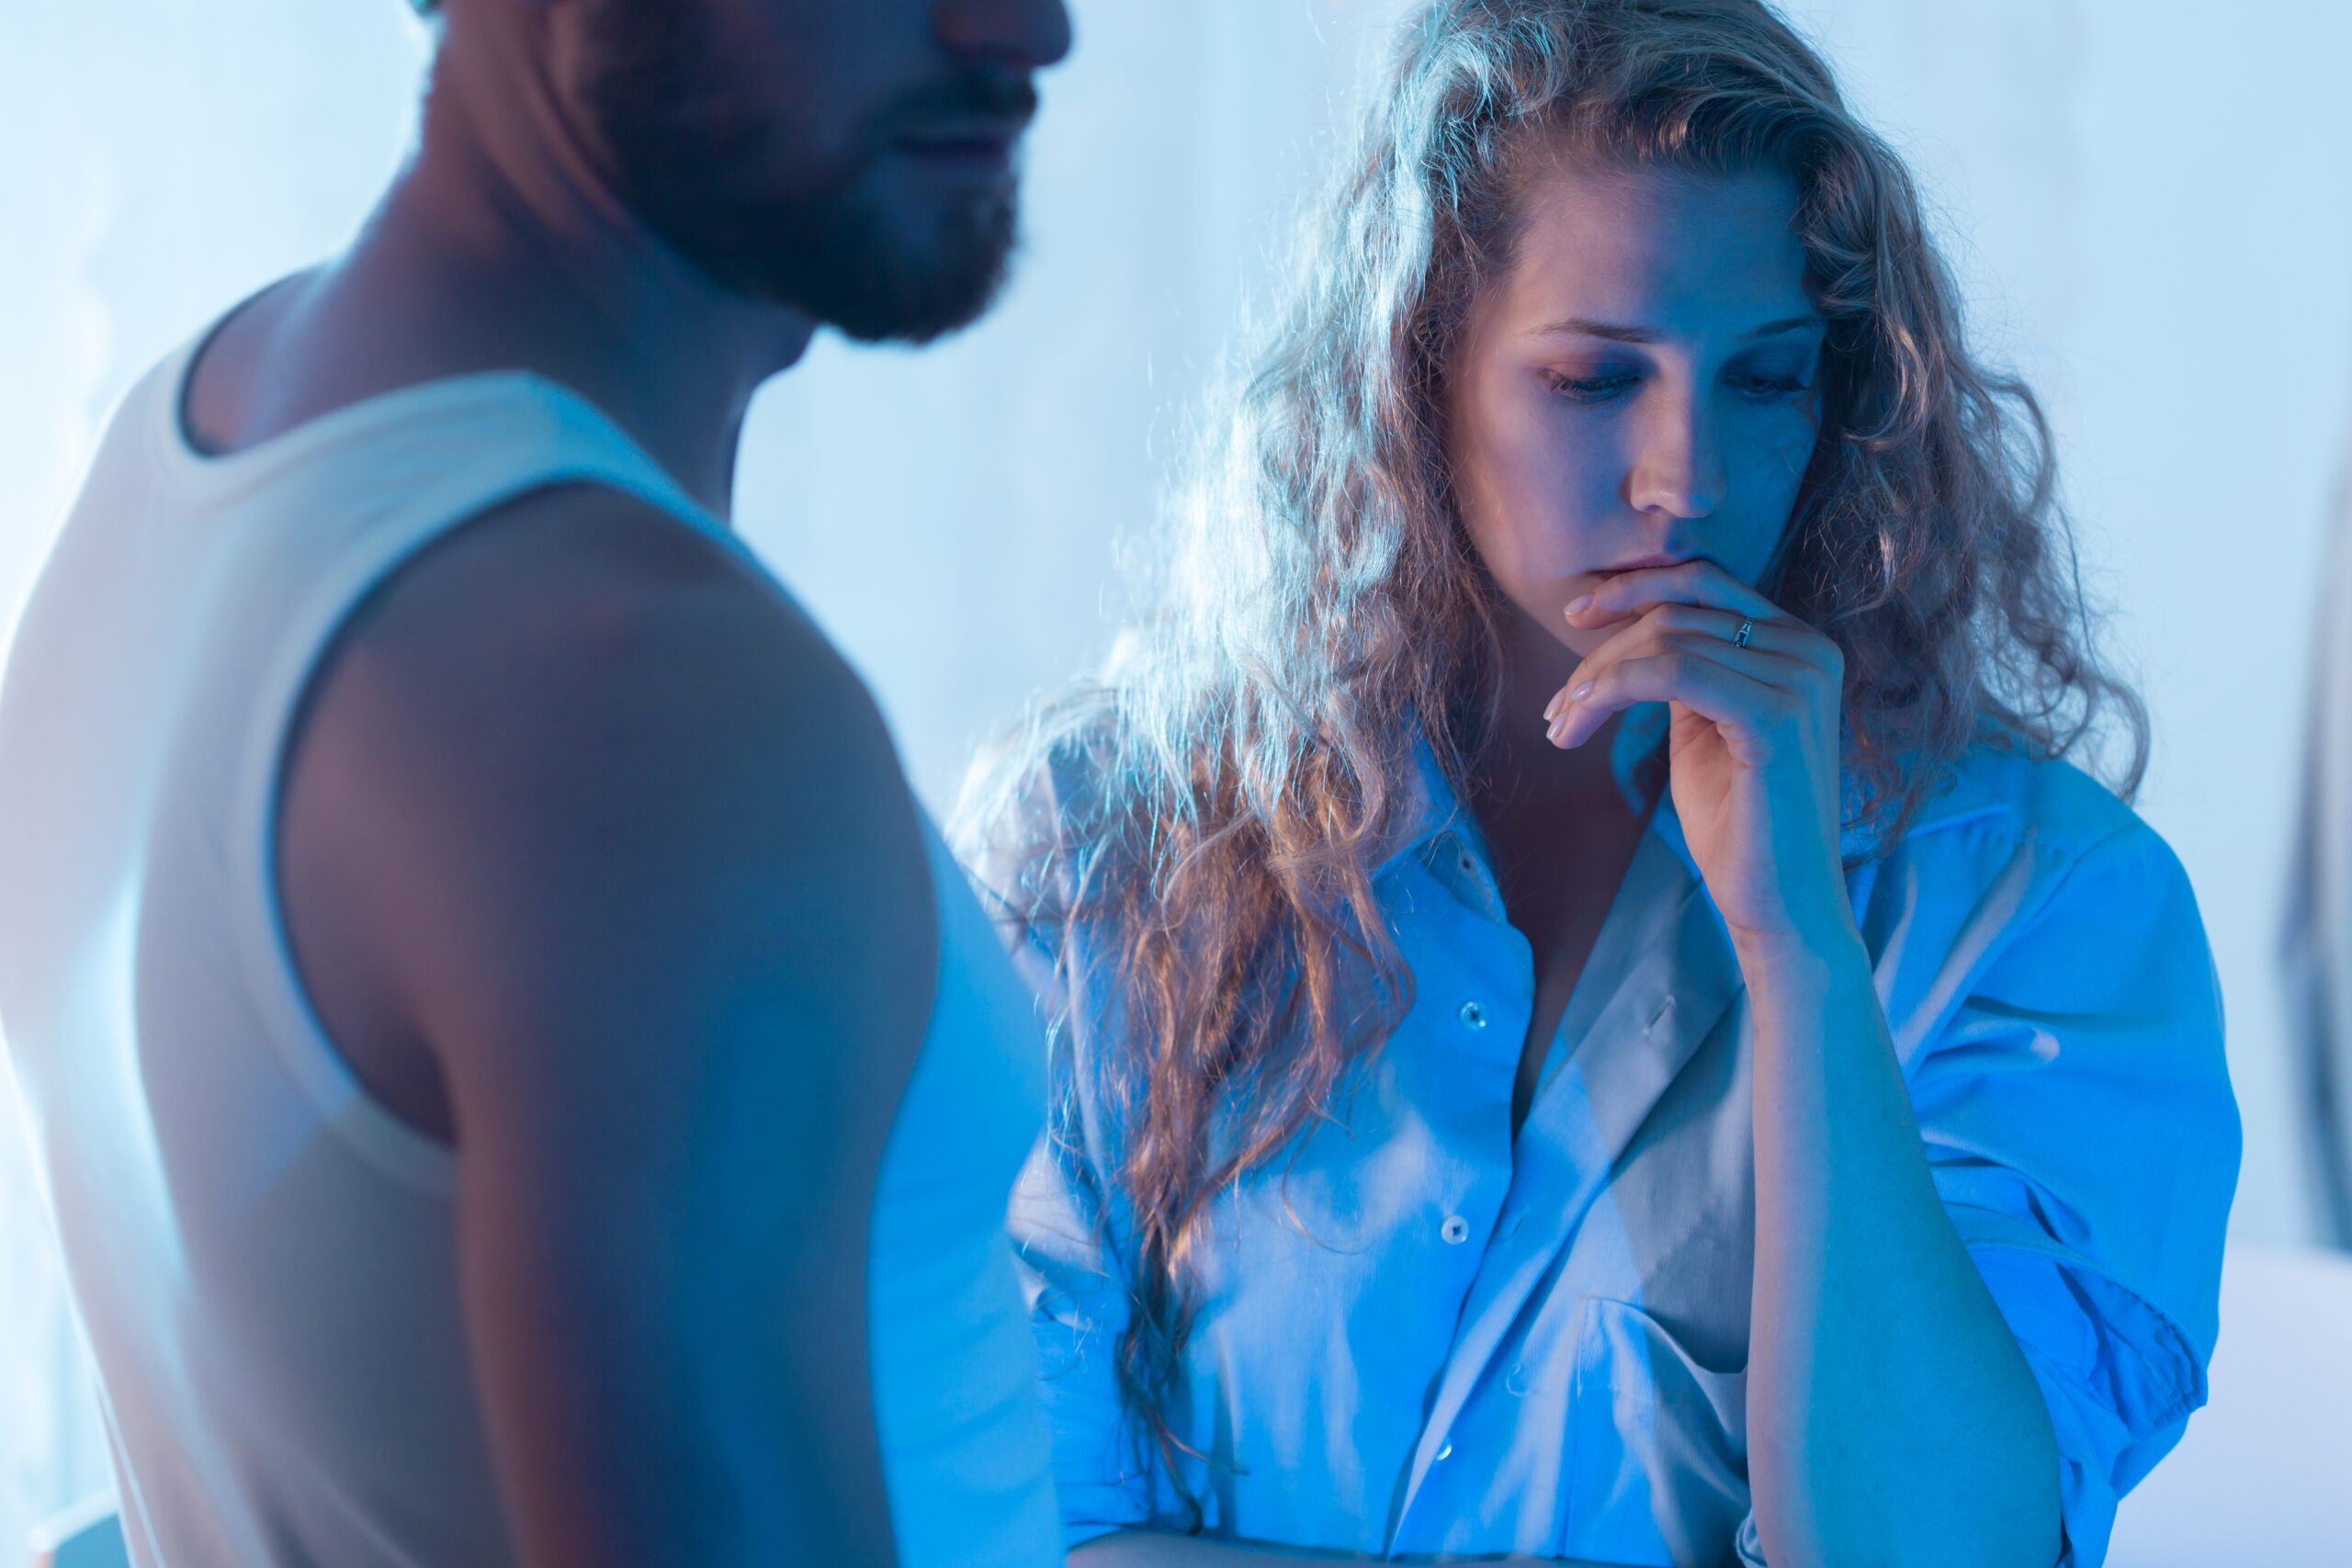 BREAKING UP OVER A SEXLESS RELATIONSHIP: IS IT THE RIGHT DECISION?”